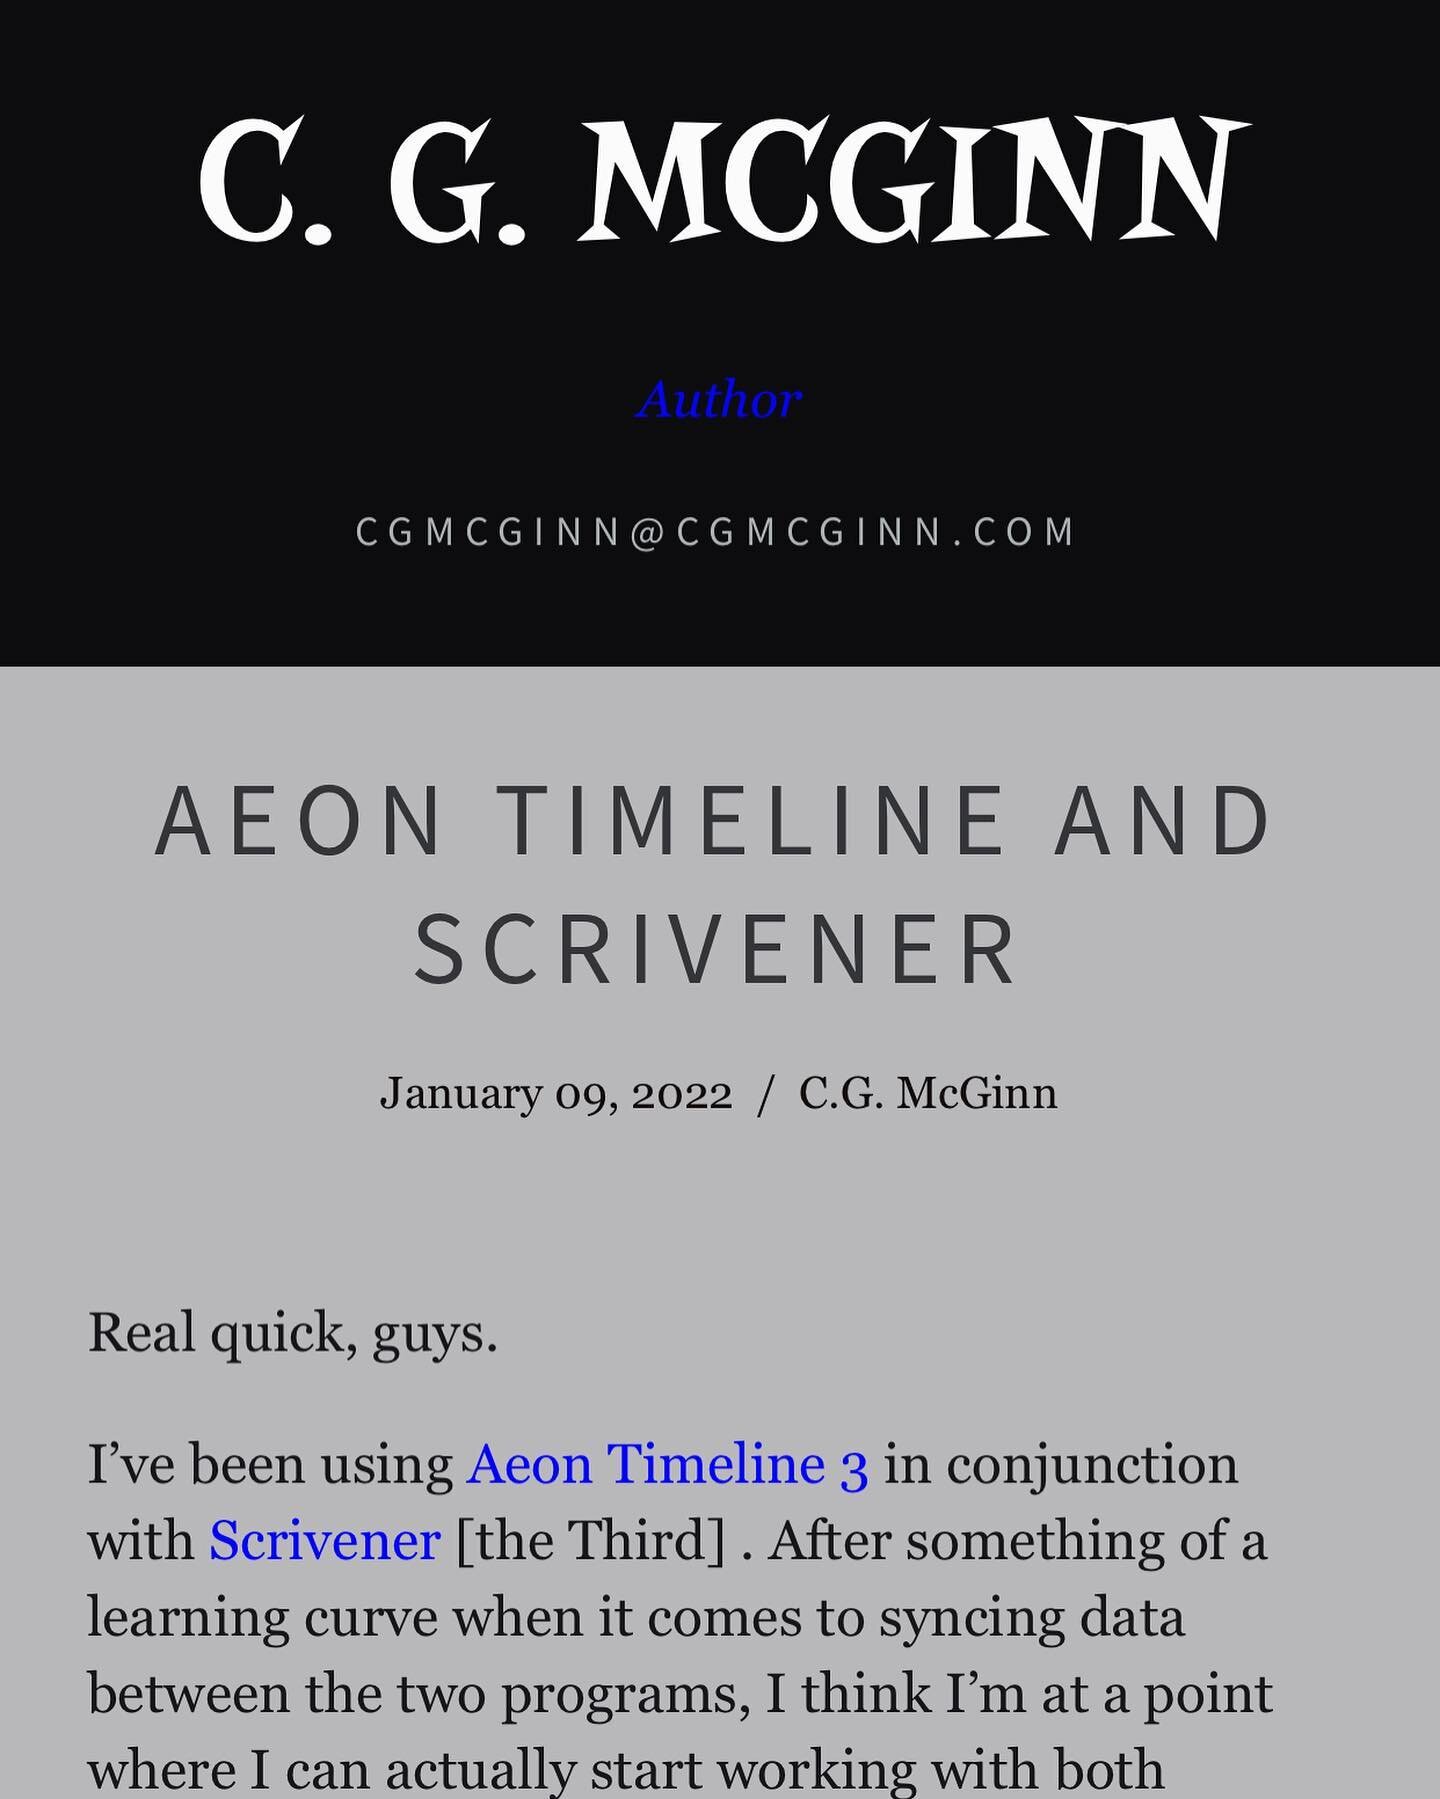 New post!
Quick post about how I&rsquo;m progressing as a writer using sweet apps like @scrivenerapp and Aeon Timeline. #scrivener #scrivenerapp #aeontimeline #amwriting #amwritingscifi #anwritingfiction